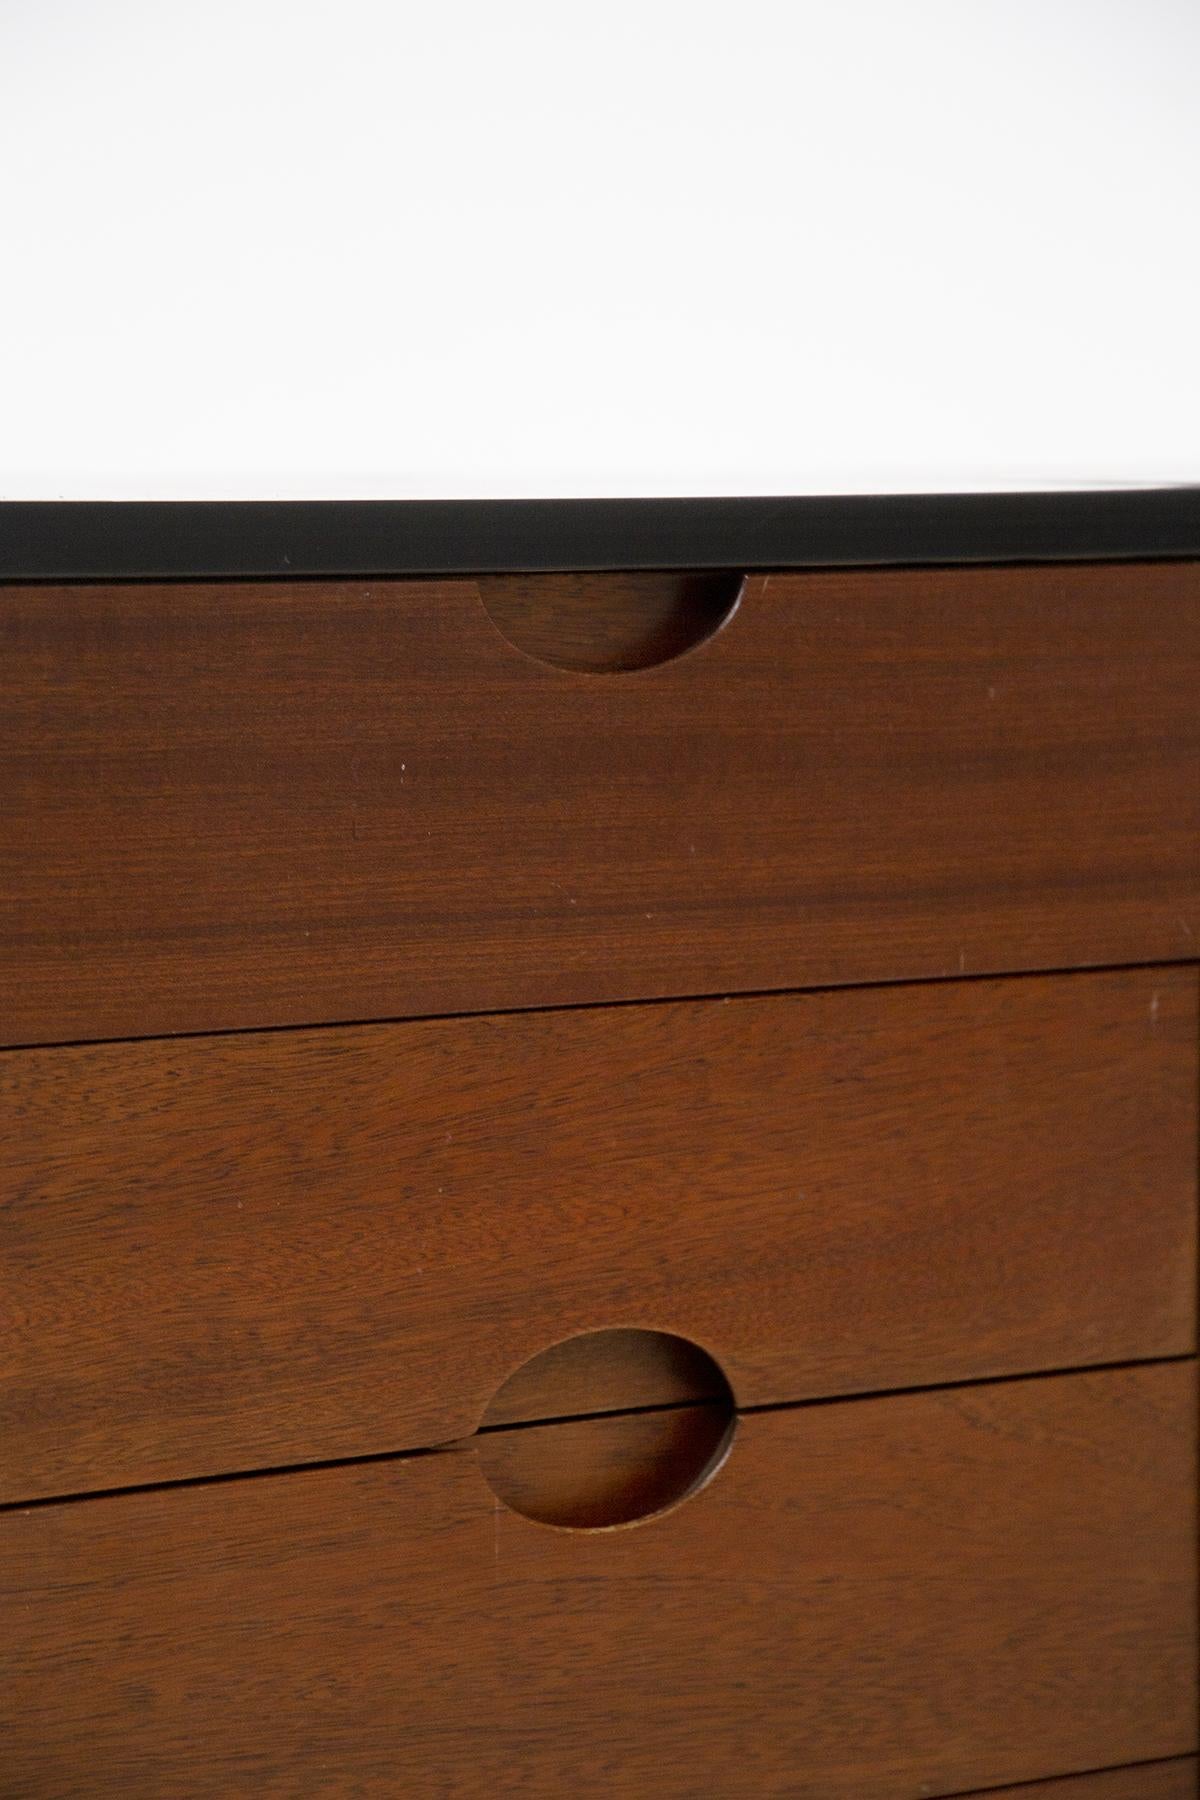 Beautiful pair of wooden chest of drawers made by Luigi Caccia Dominioni in the 70's for the Vips Residence.
The chests of drawers are made of wood in lighter and darker shades of brown.
The structure is rectangular, each consisting of 5 drawers and